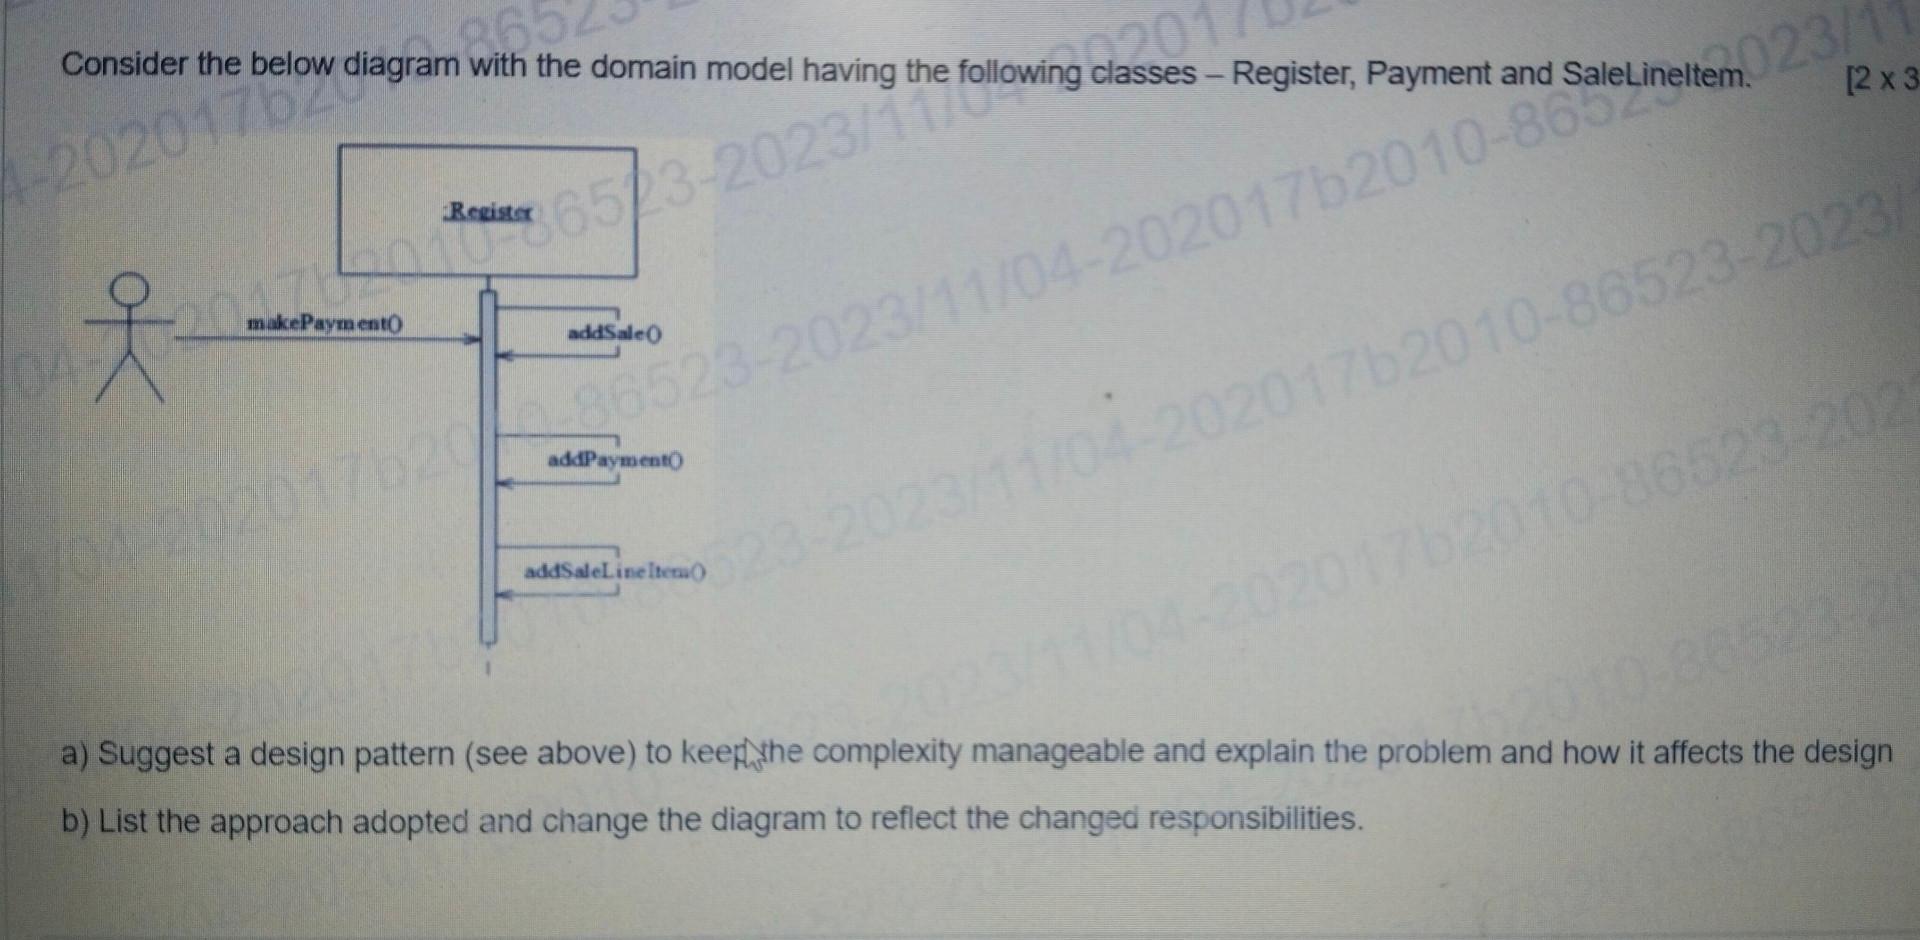 2010-36523-2023/117lowing classes - Register, Payment and SaleLineltem. Consider the below diagram with the